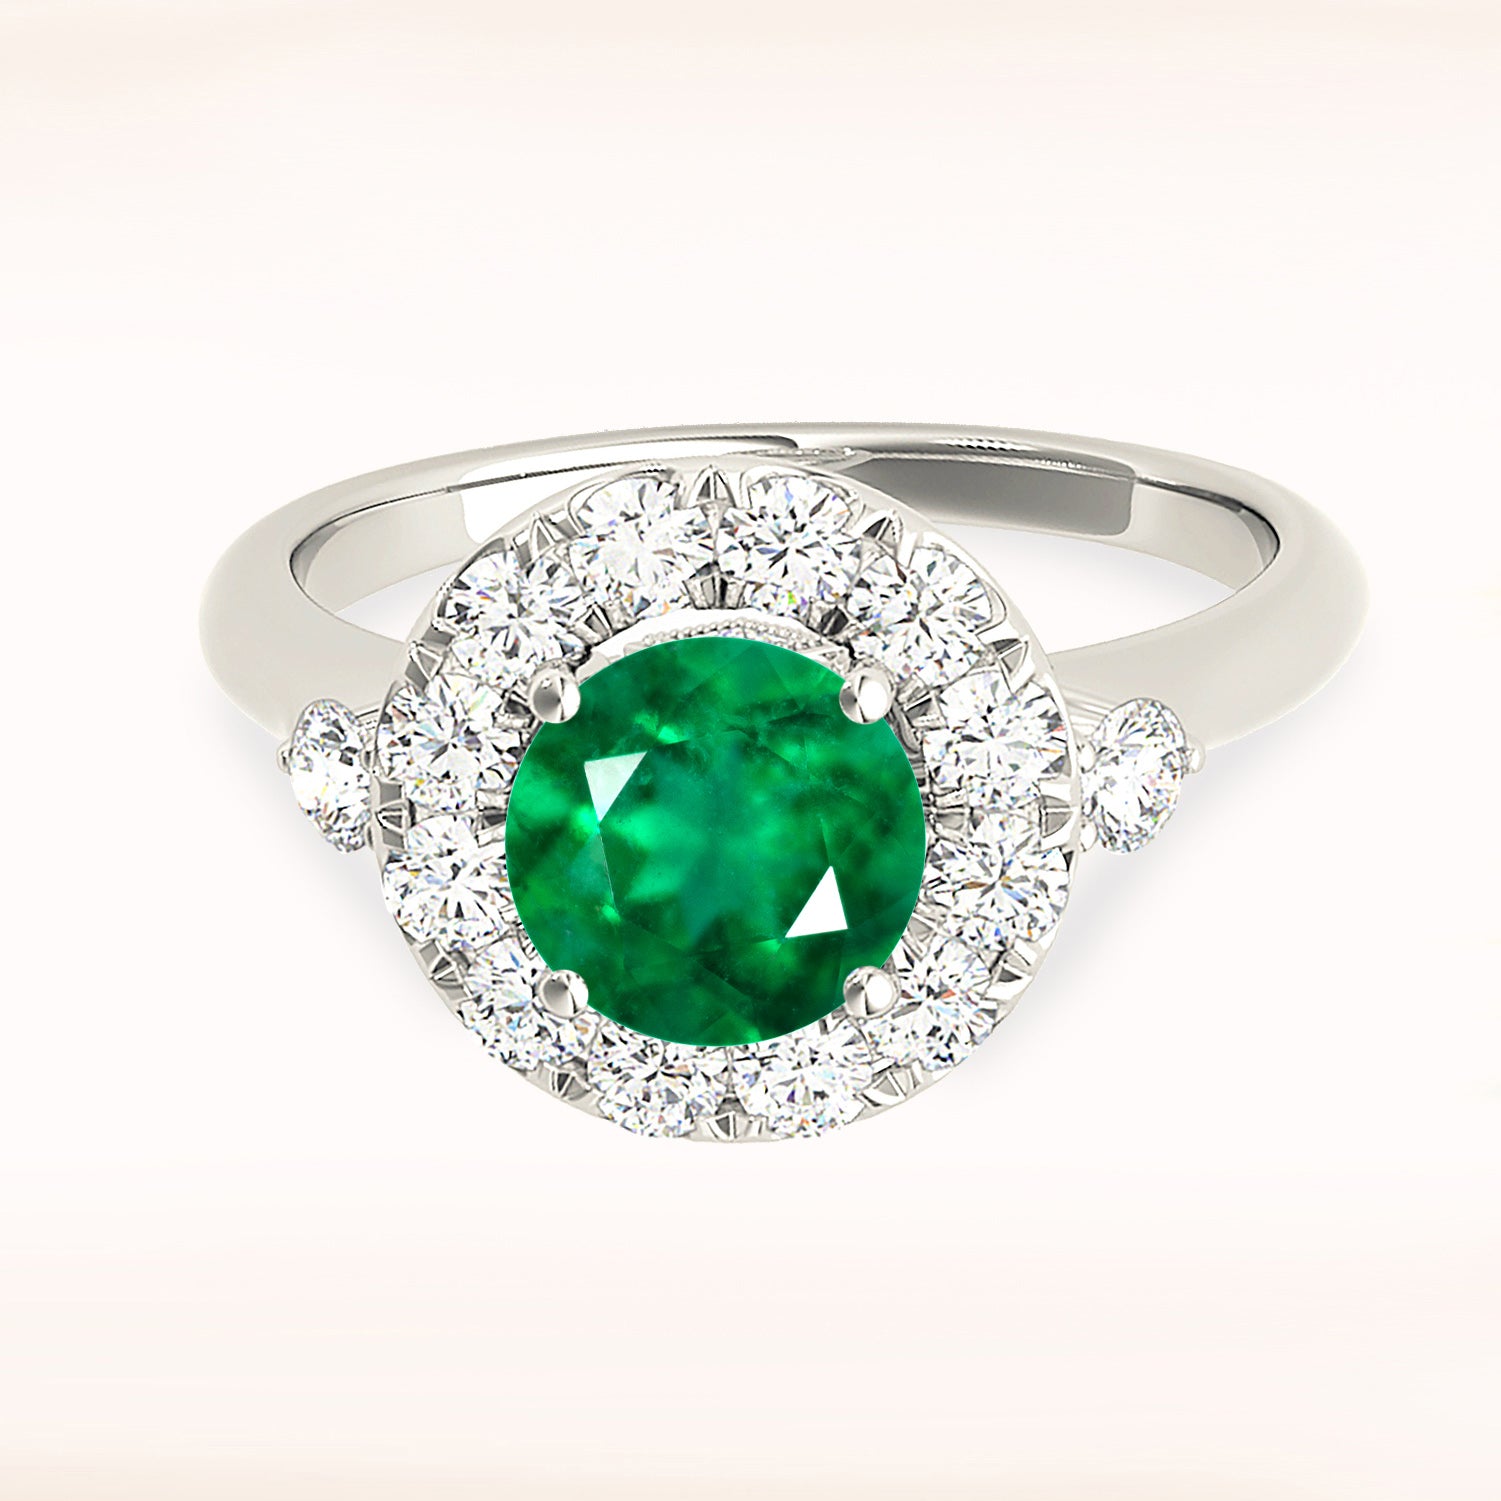 1.14 ct. Genuine Emerald Ring With 0.40 ctw. Diamond Halo and Side Accent Diamonds, Solid Gold Band-VIRABYANI